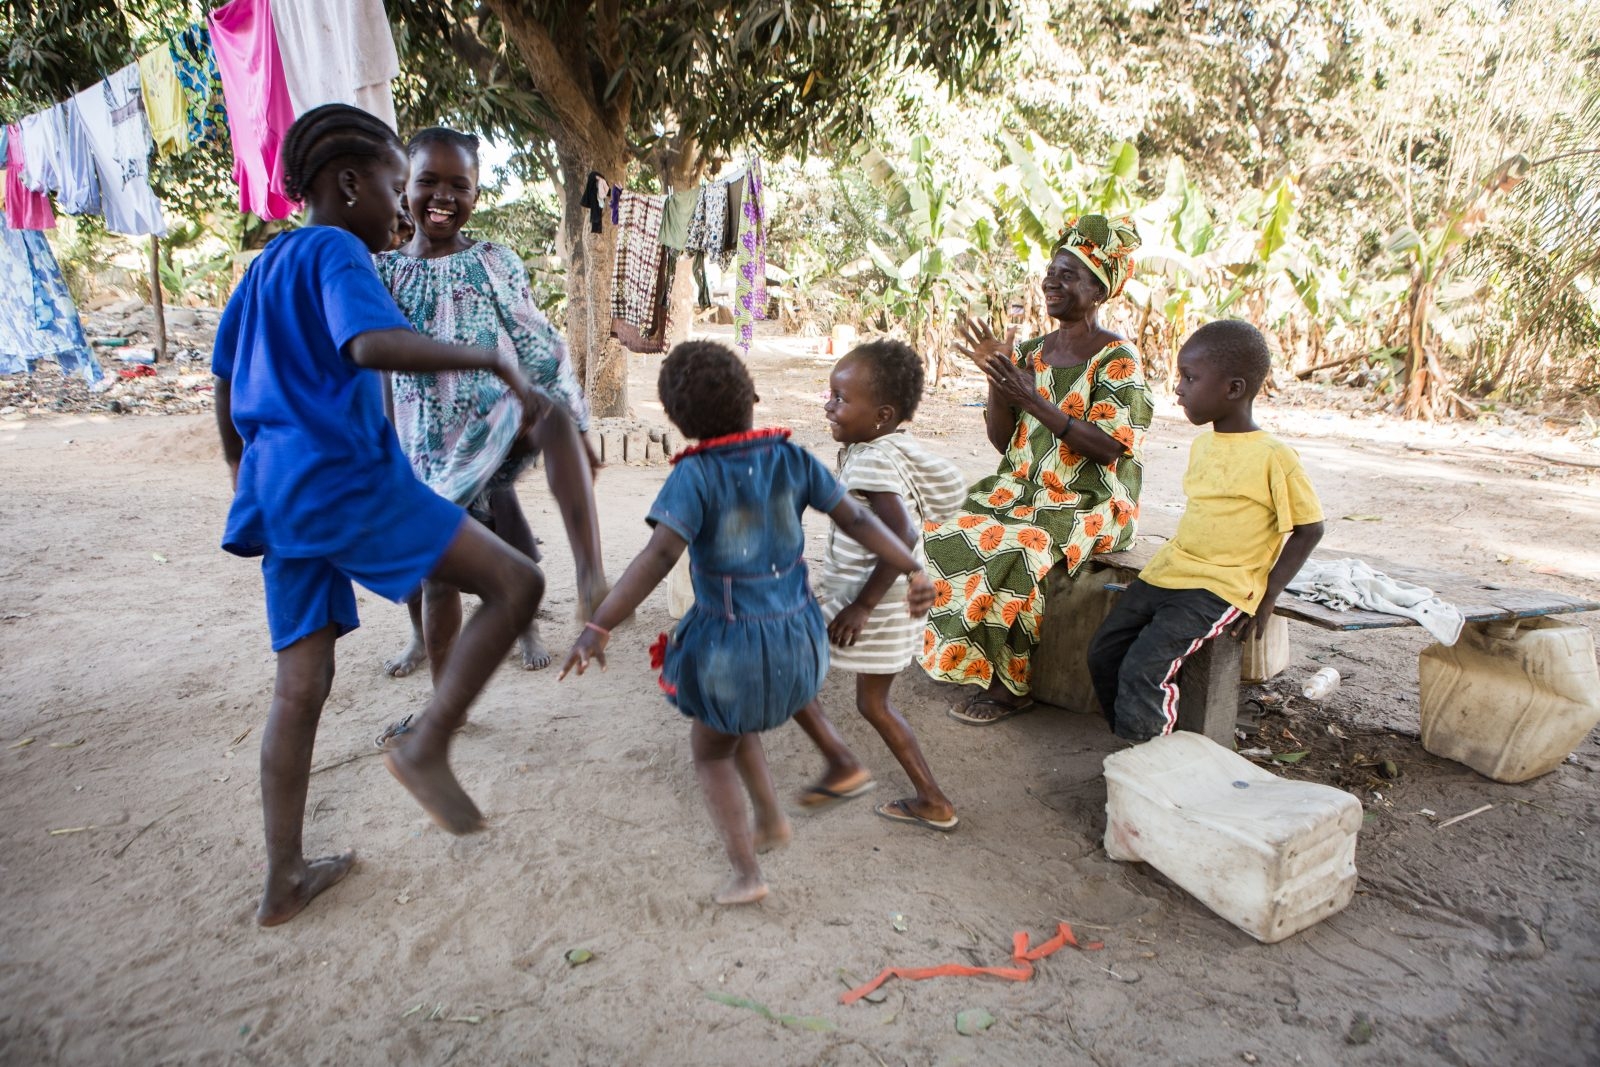 A group of young children laugh and dance in celebration of trachoma elimination.